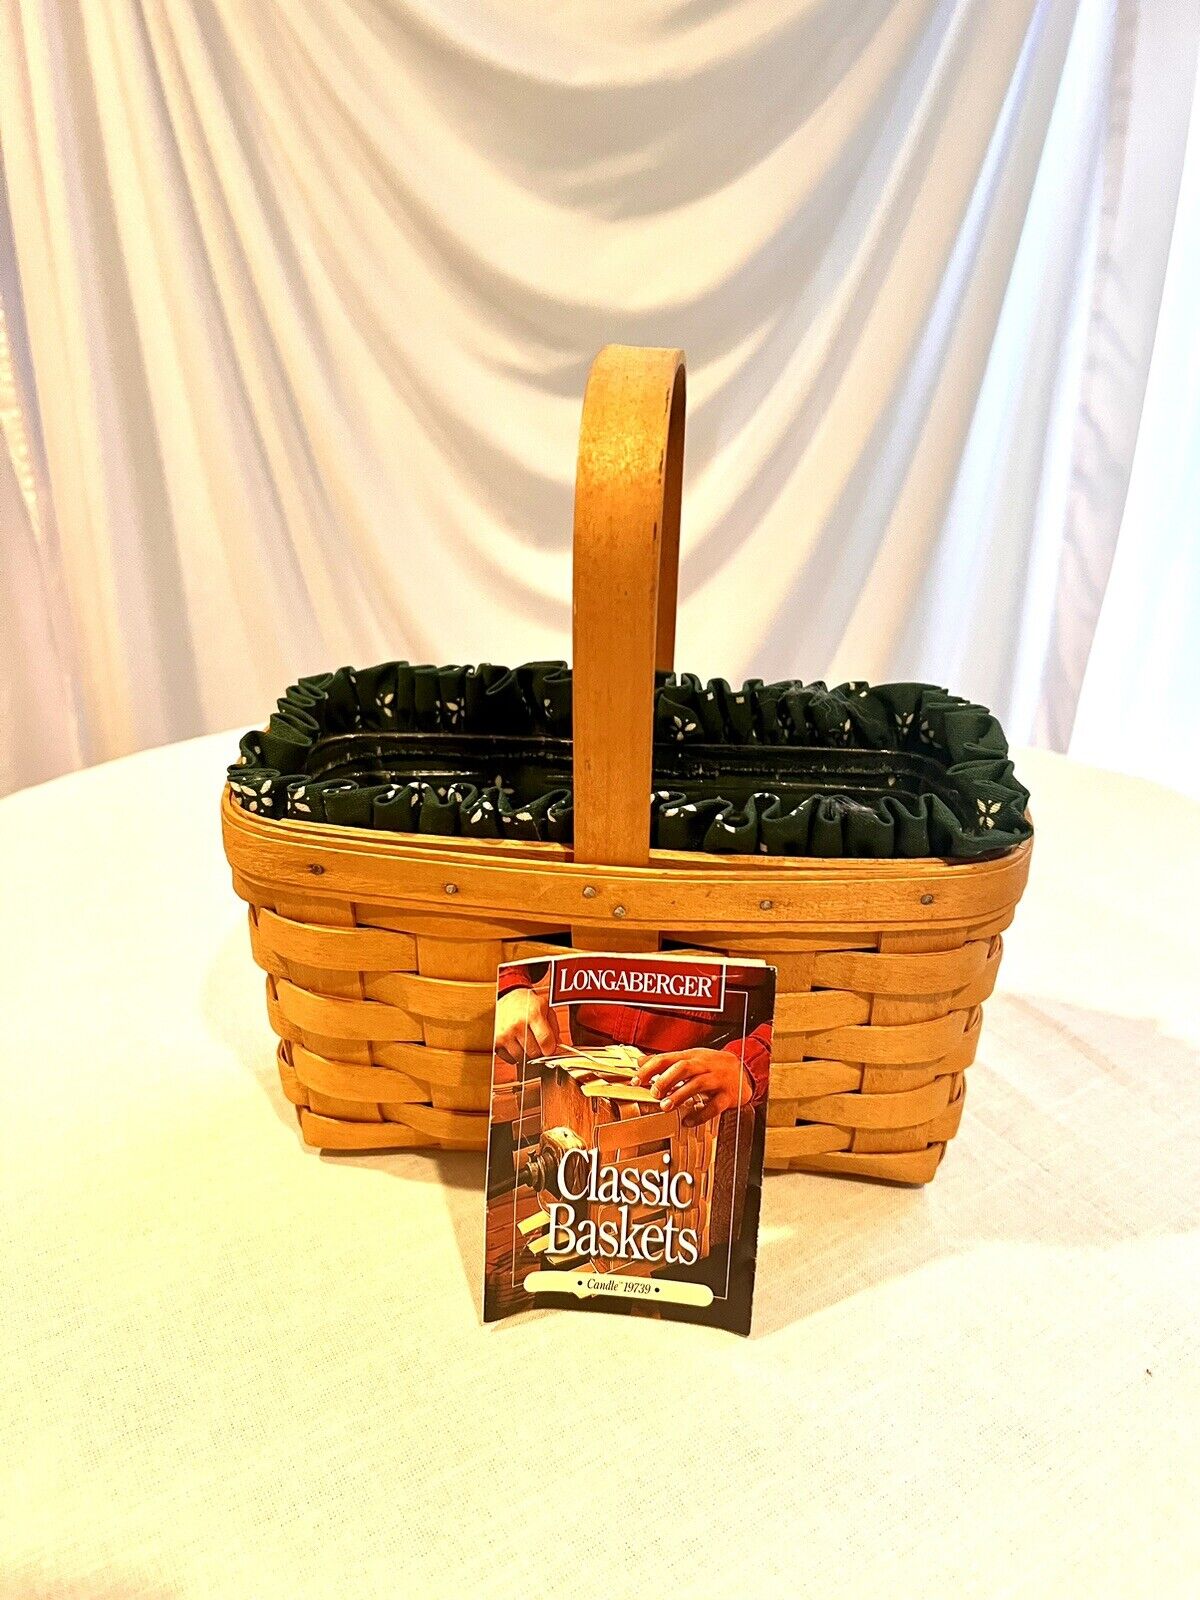 Longaberger Basket 9x5x4 with Cloth liner and Plastic Protector